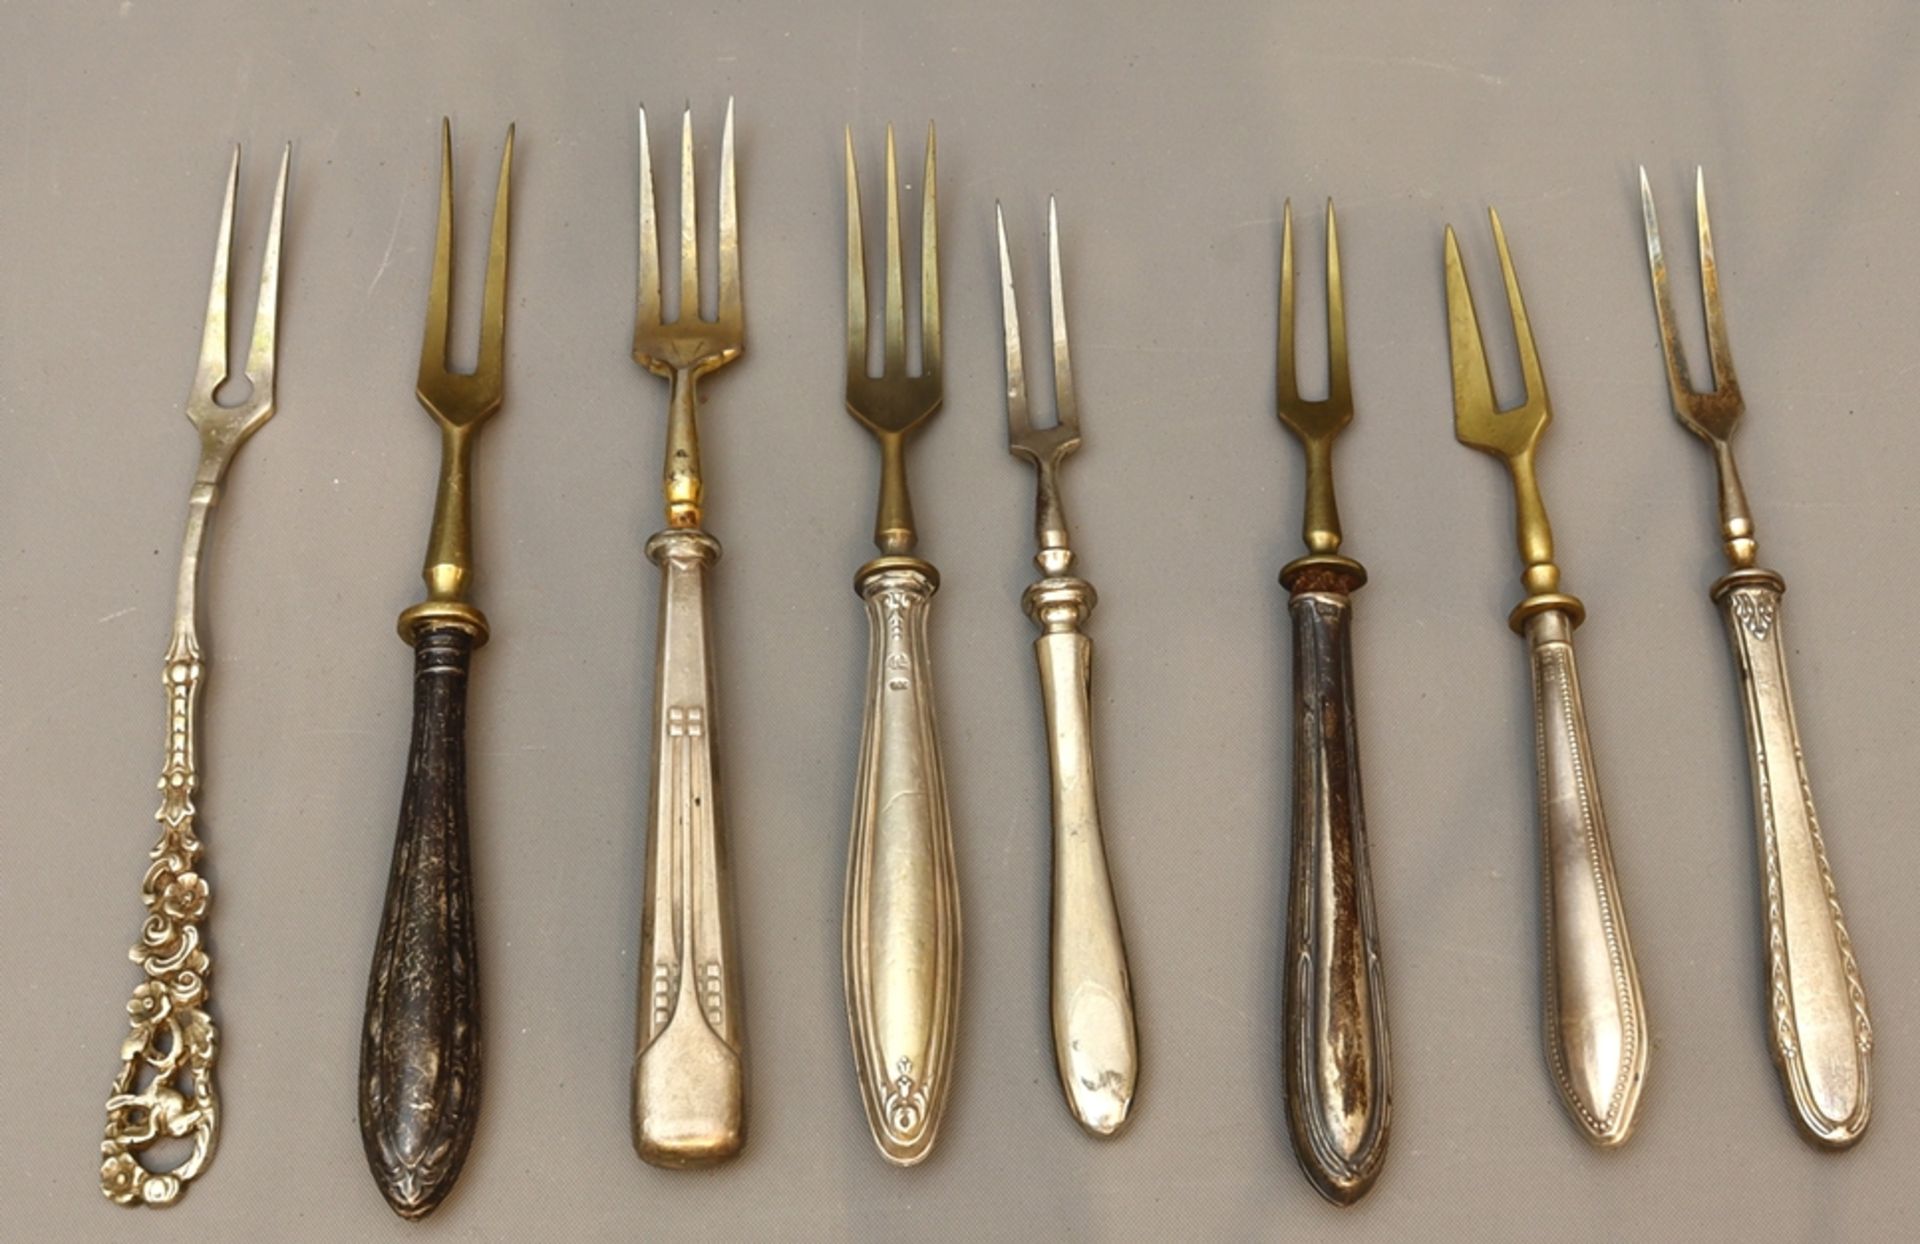 Lot of 14 serving forks of different types, early to mid 20th century, German - Image 2 of 3